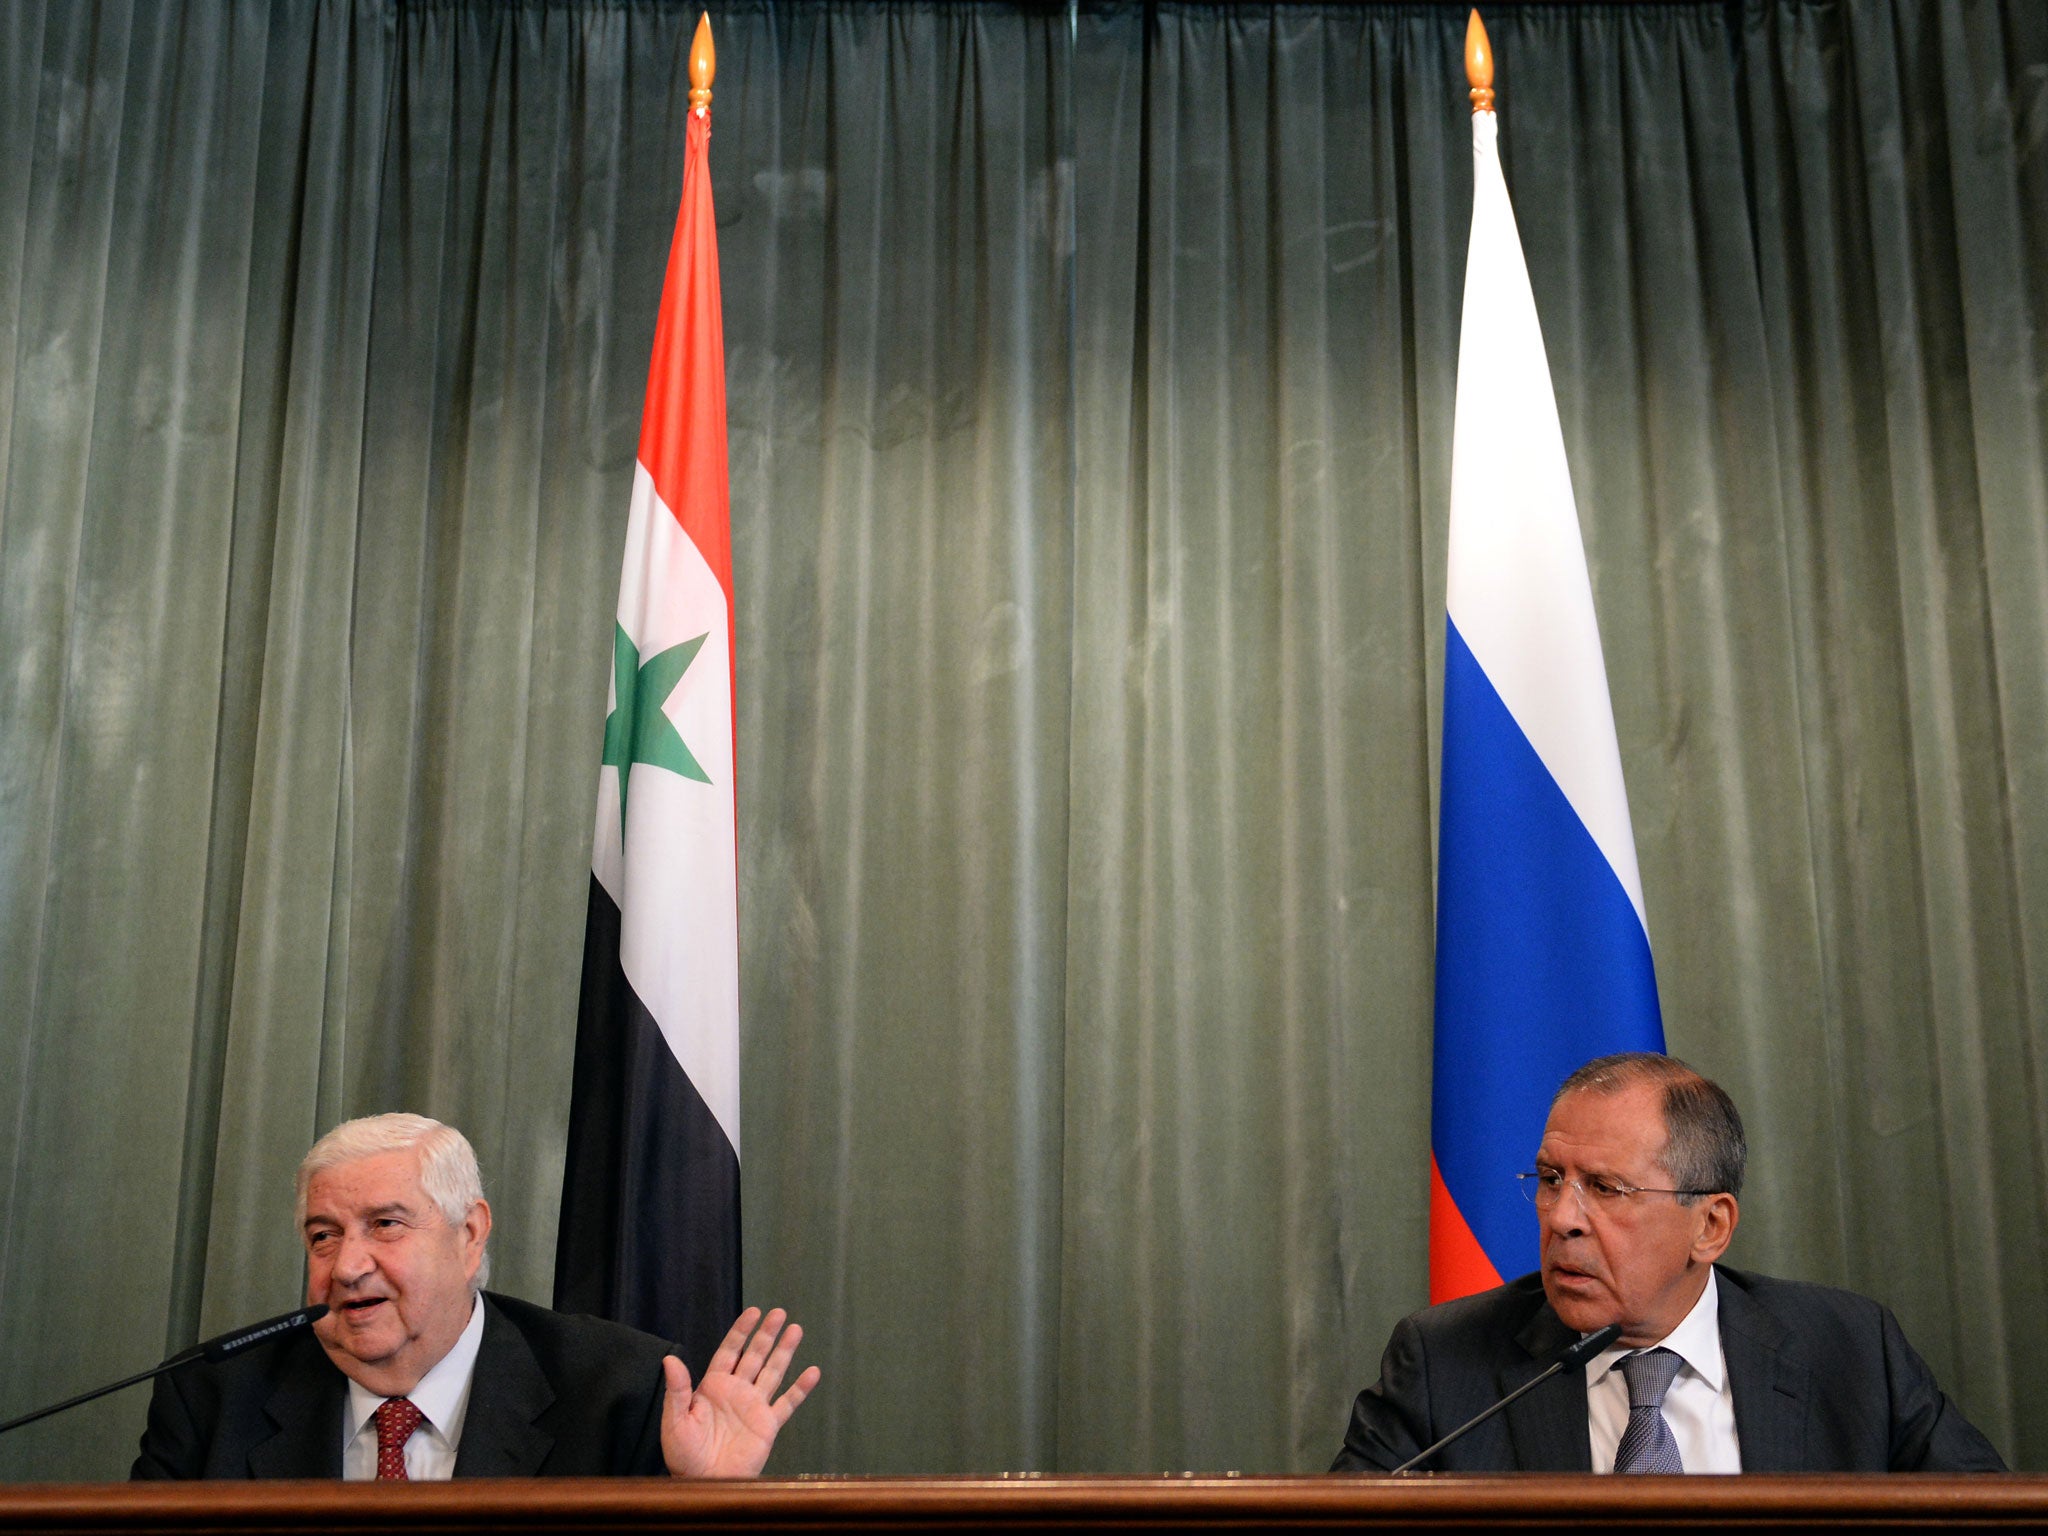 Sergei Lavrov, the Russian foreign minister, announced the proposal after talks in Moscow with his Syrian counterpart, Walid al-Moallem